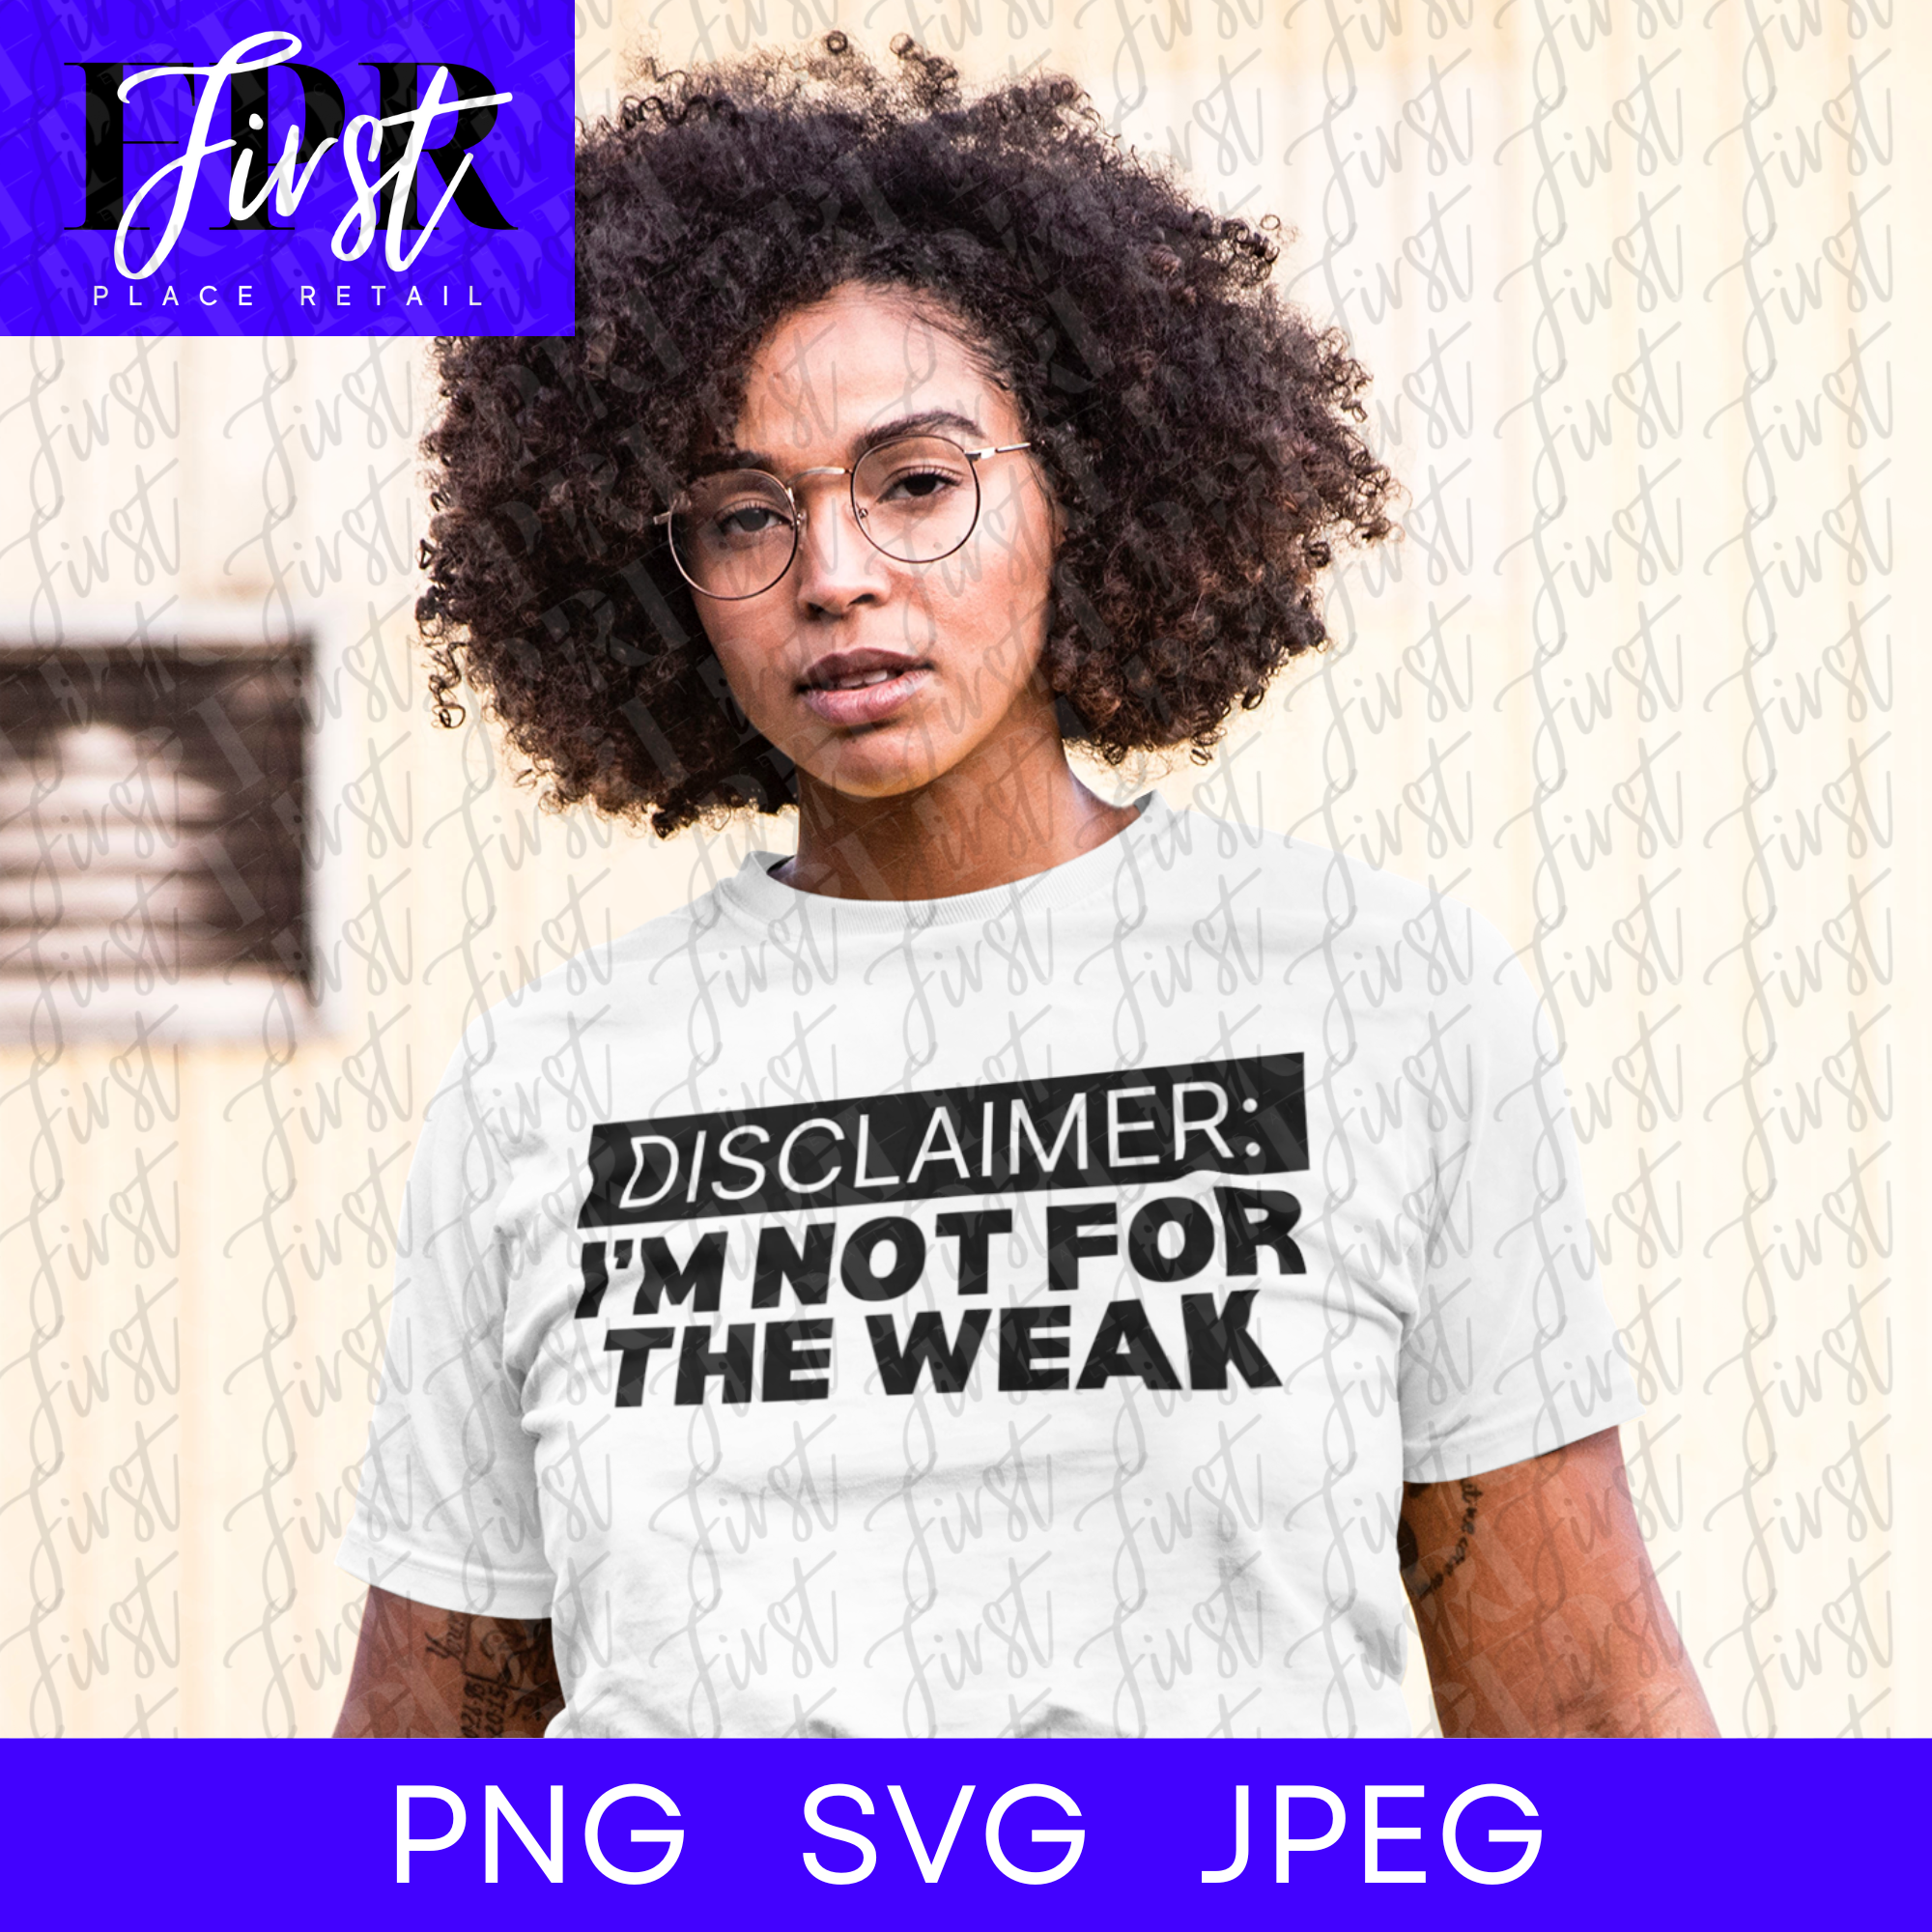 Disclaimer I’m Not For The Weak svg Cut File, Printable png and jpeg for Iron On Transfer. Instant Download. (Digital Art)